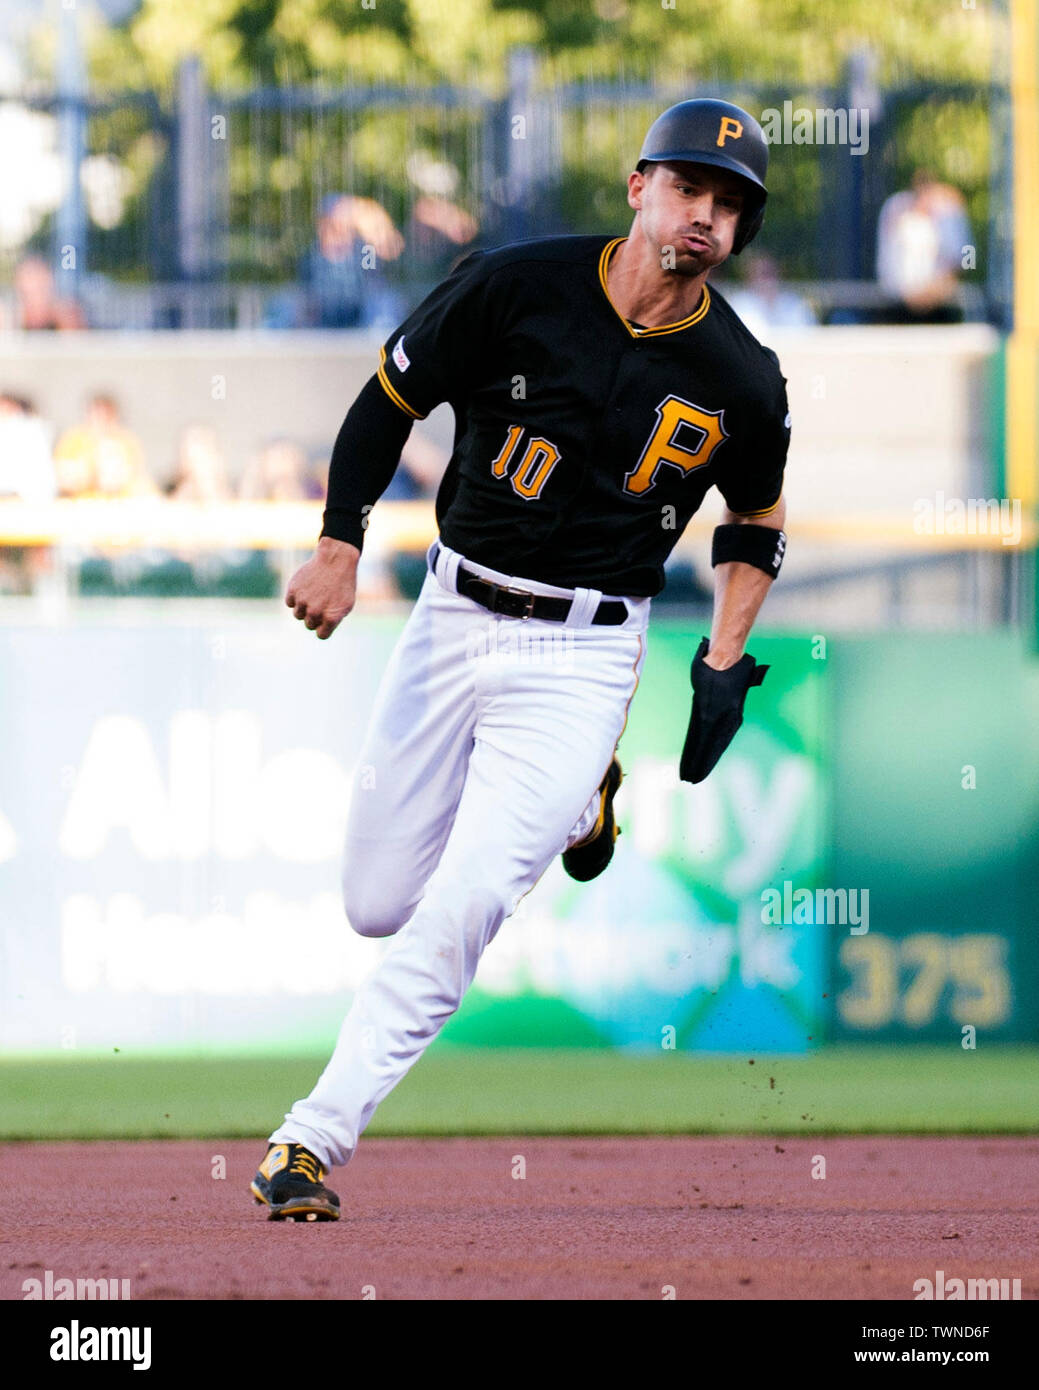 Pittsburgh, Pennsylvania, USA. 21st June, 2019. Pittsburgh Pirates shortstop Kevin Newman (27) runs to third base against the San Diego Padres in their game in Pittsburgh, Pennsylvania. Brent Clark/CSM/Alamy Live News Stock Photo